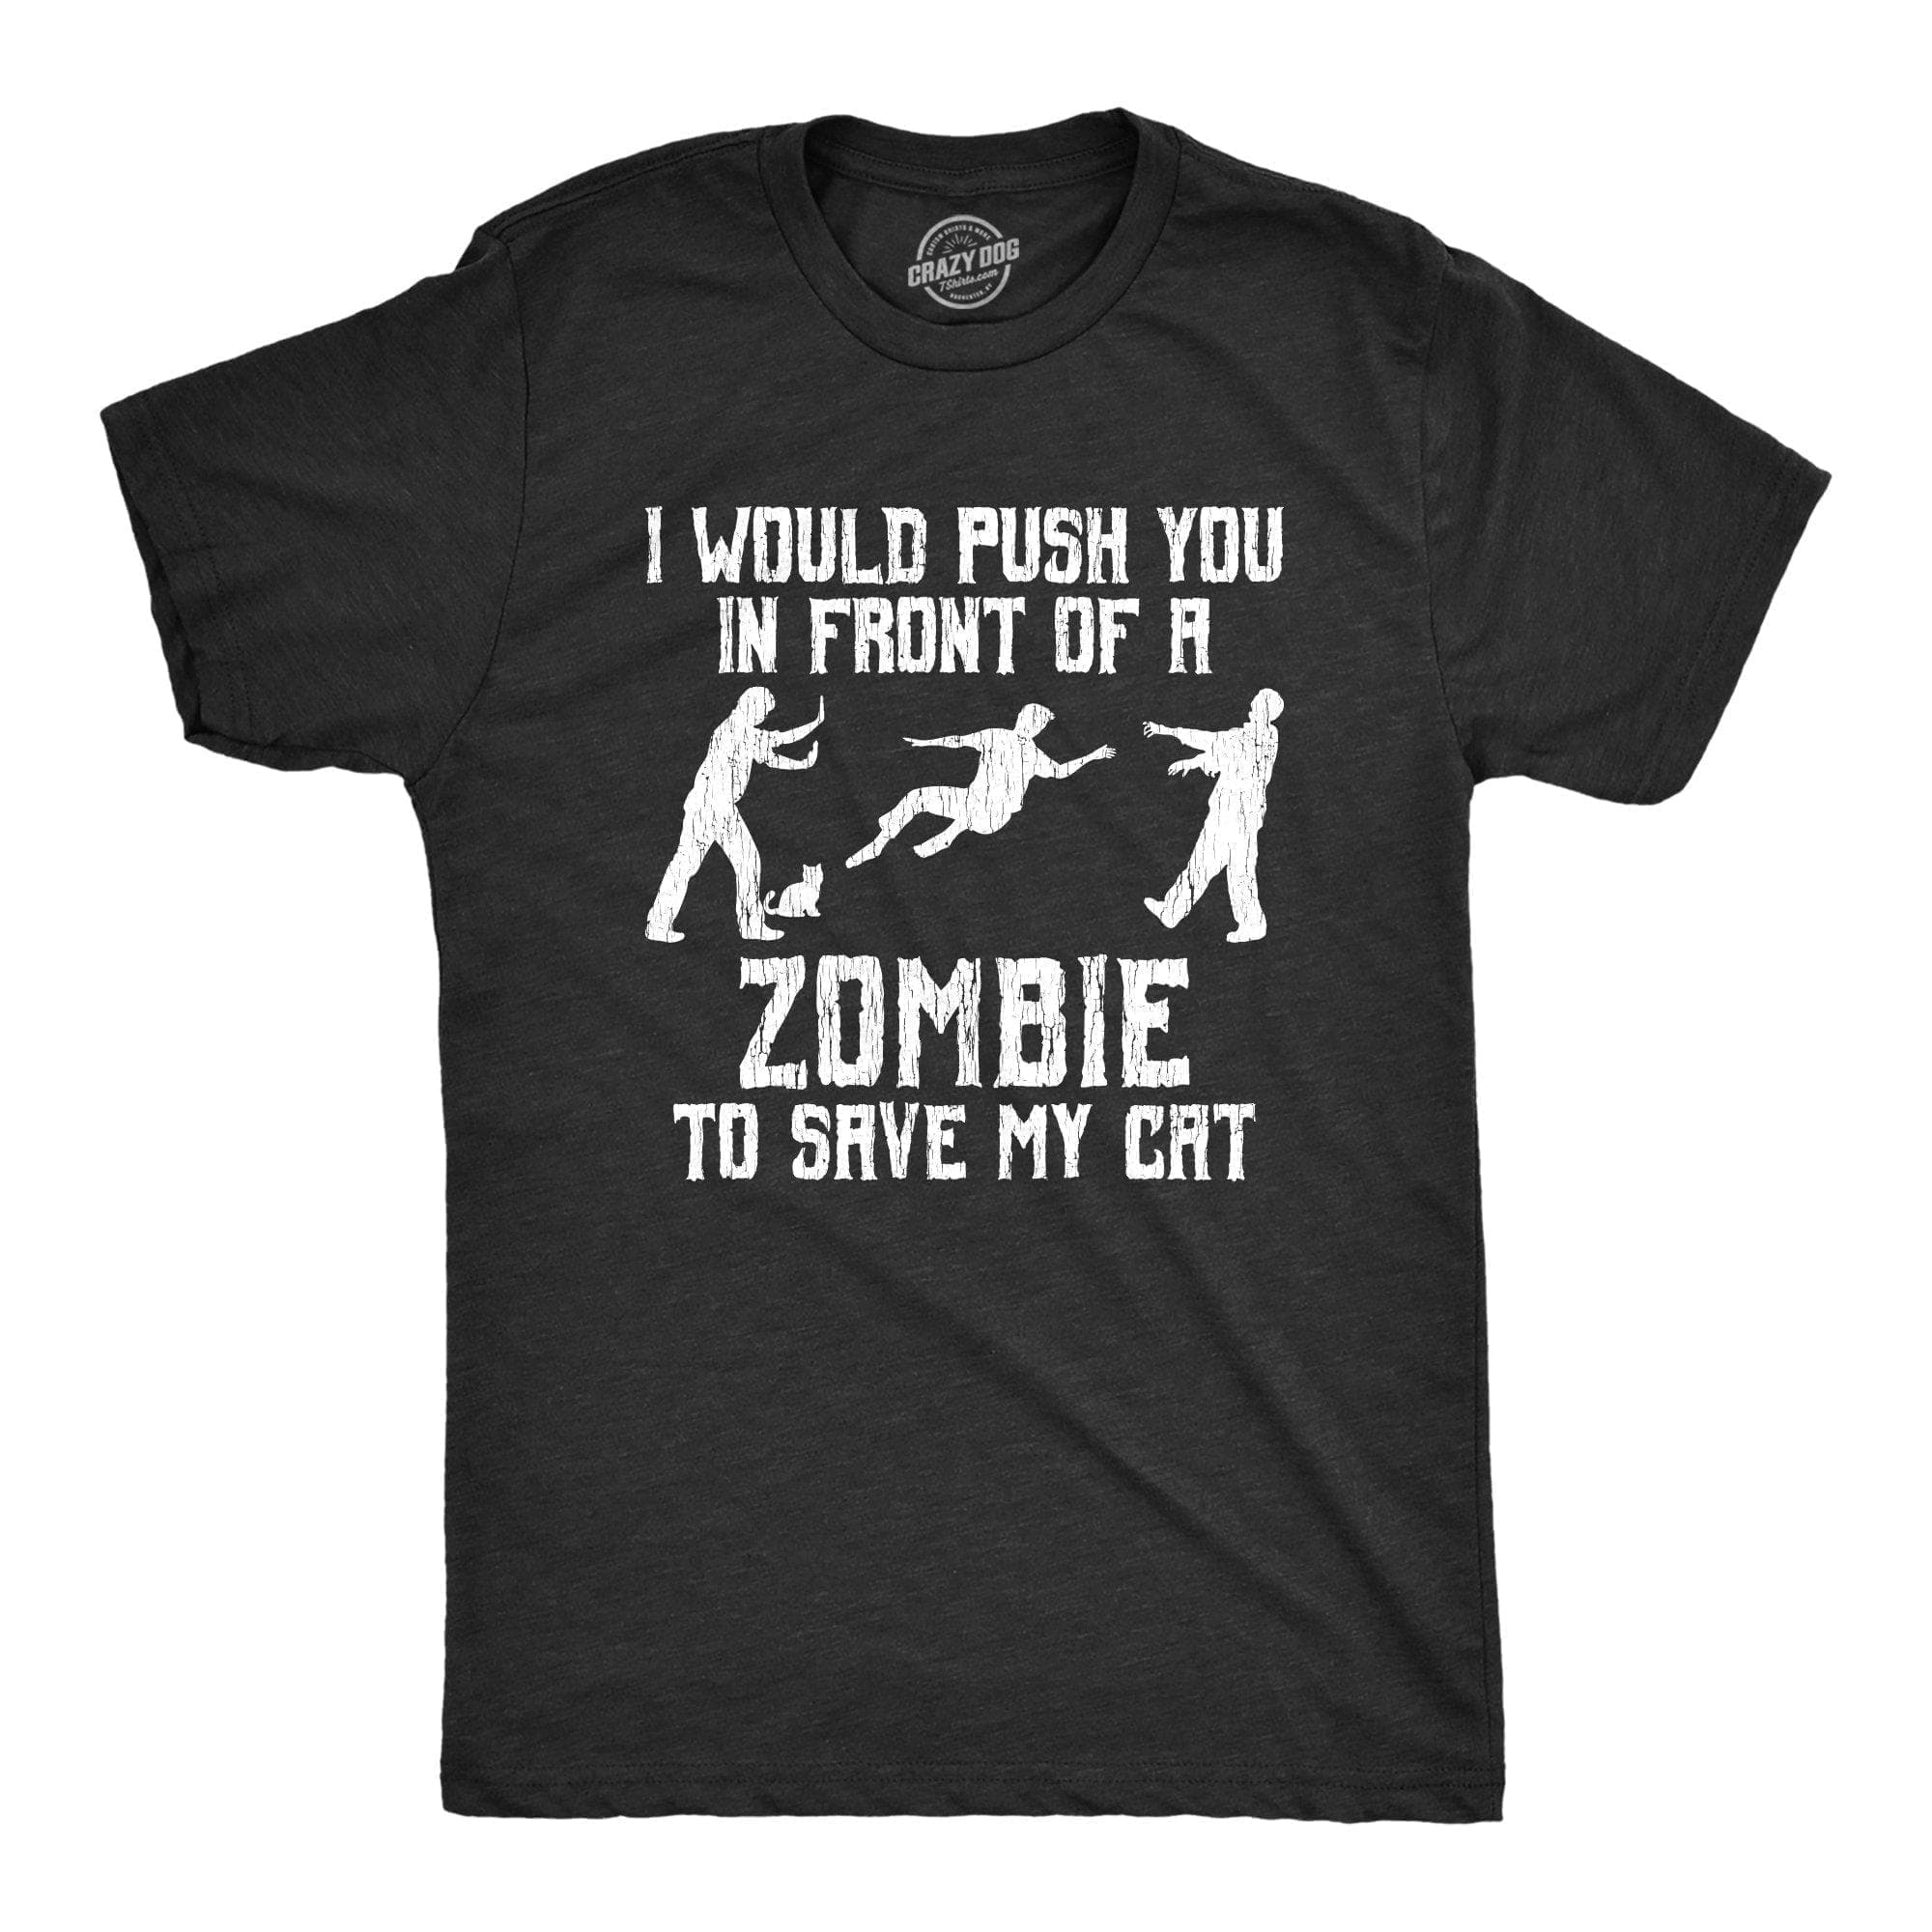 I Would Push You In Front Of A Zombie To Save My Cat Men's Tshirt - Crazy Dog T-Shirts